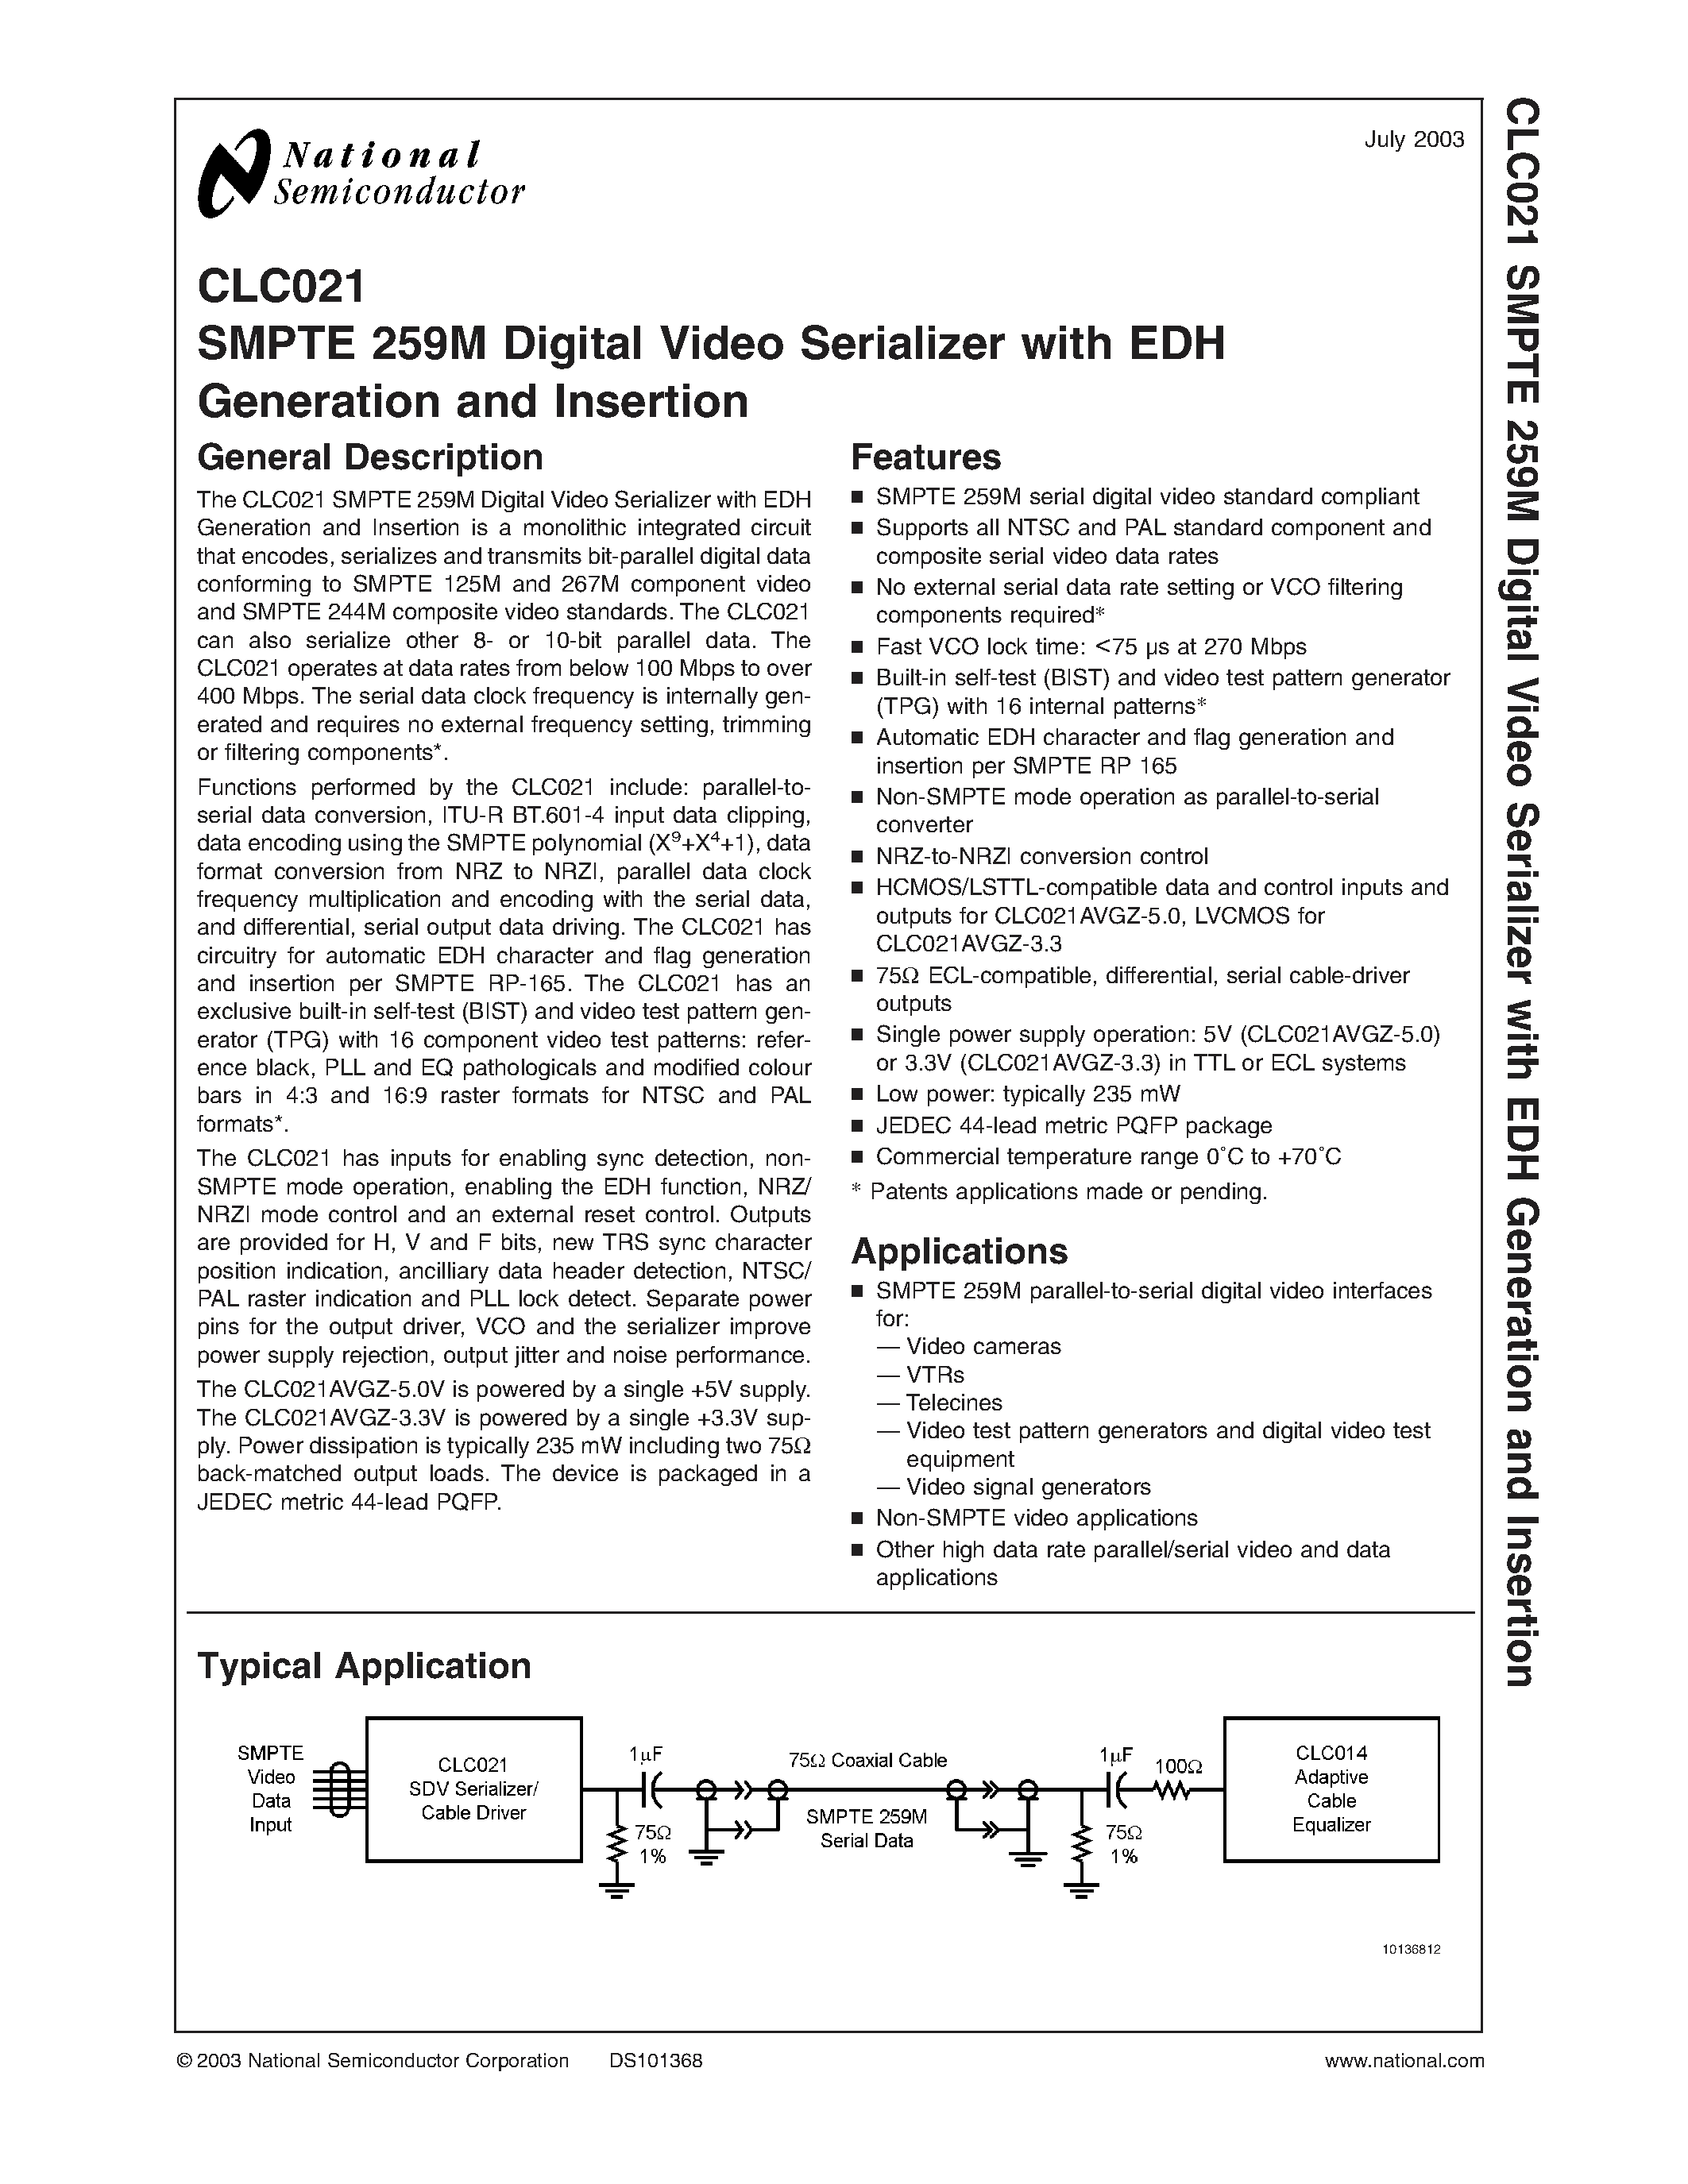 Datasheet CLC021AVGZ-3.3 - SMPTE 259M Digital Video Serializer with EDH Generation and Insertion page 1